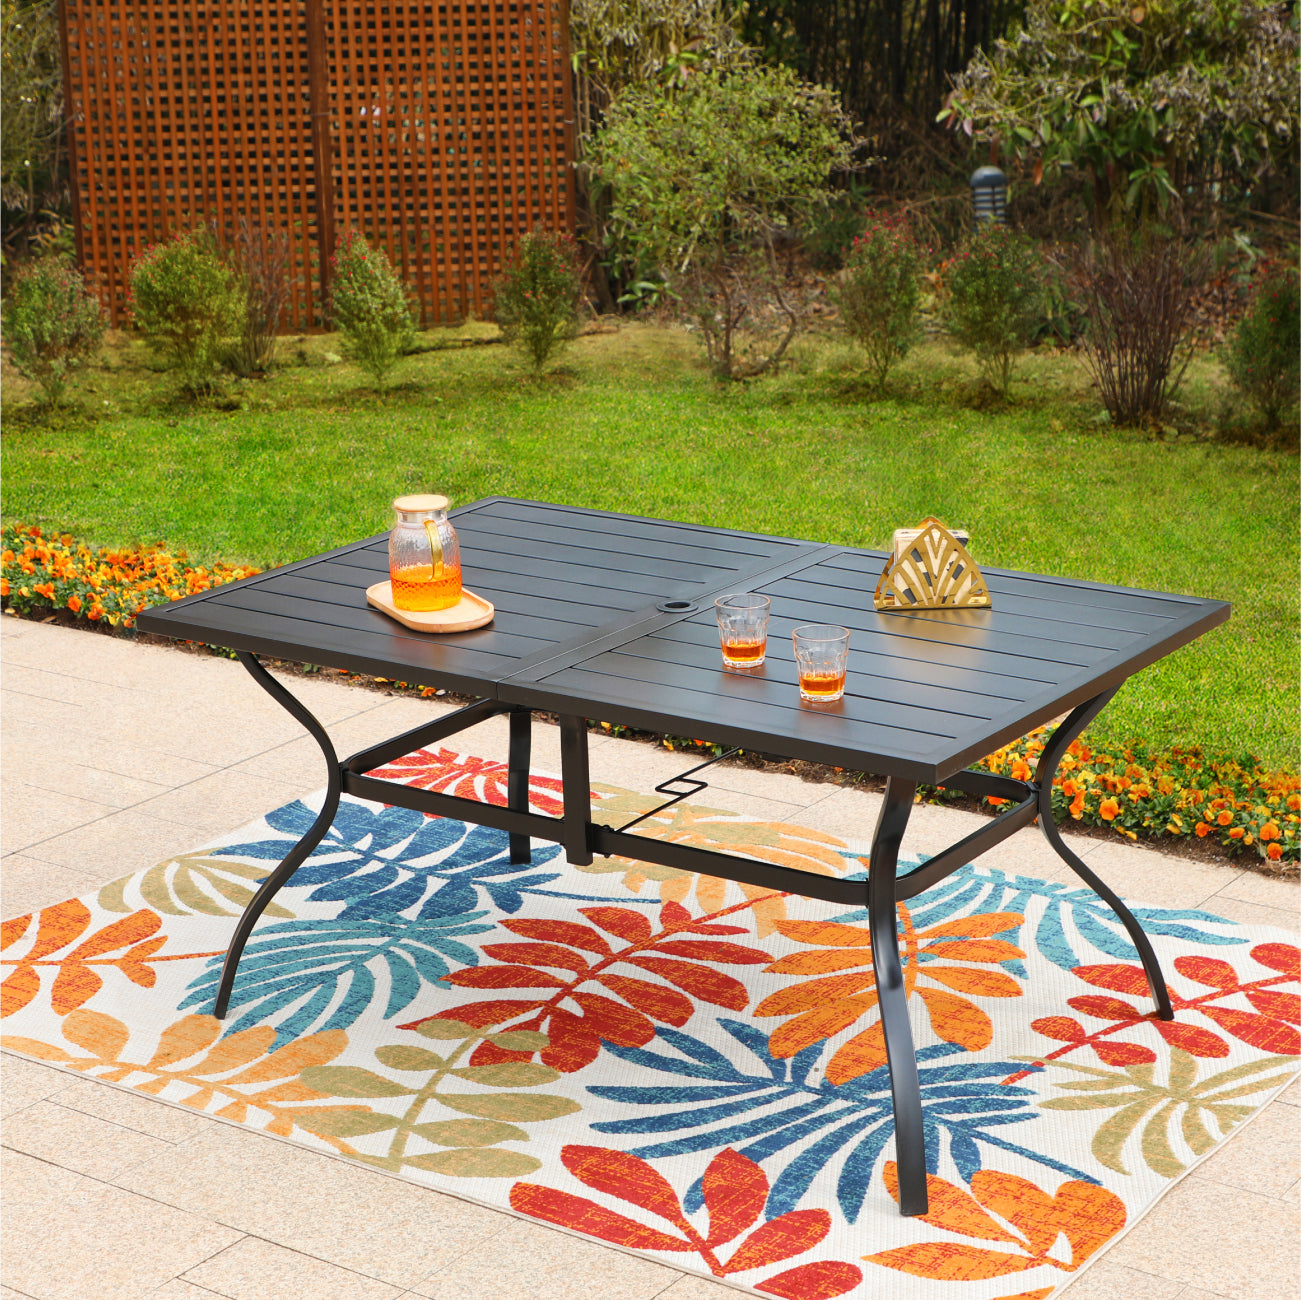 Outdoor Metal Dining Table with Umbrella Hole 6 Seaters PHI VILLA Outdoor garden table